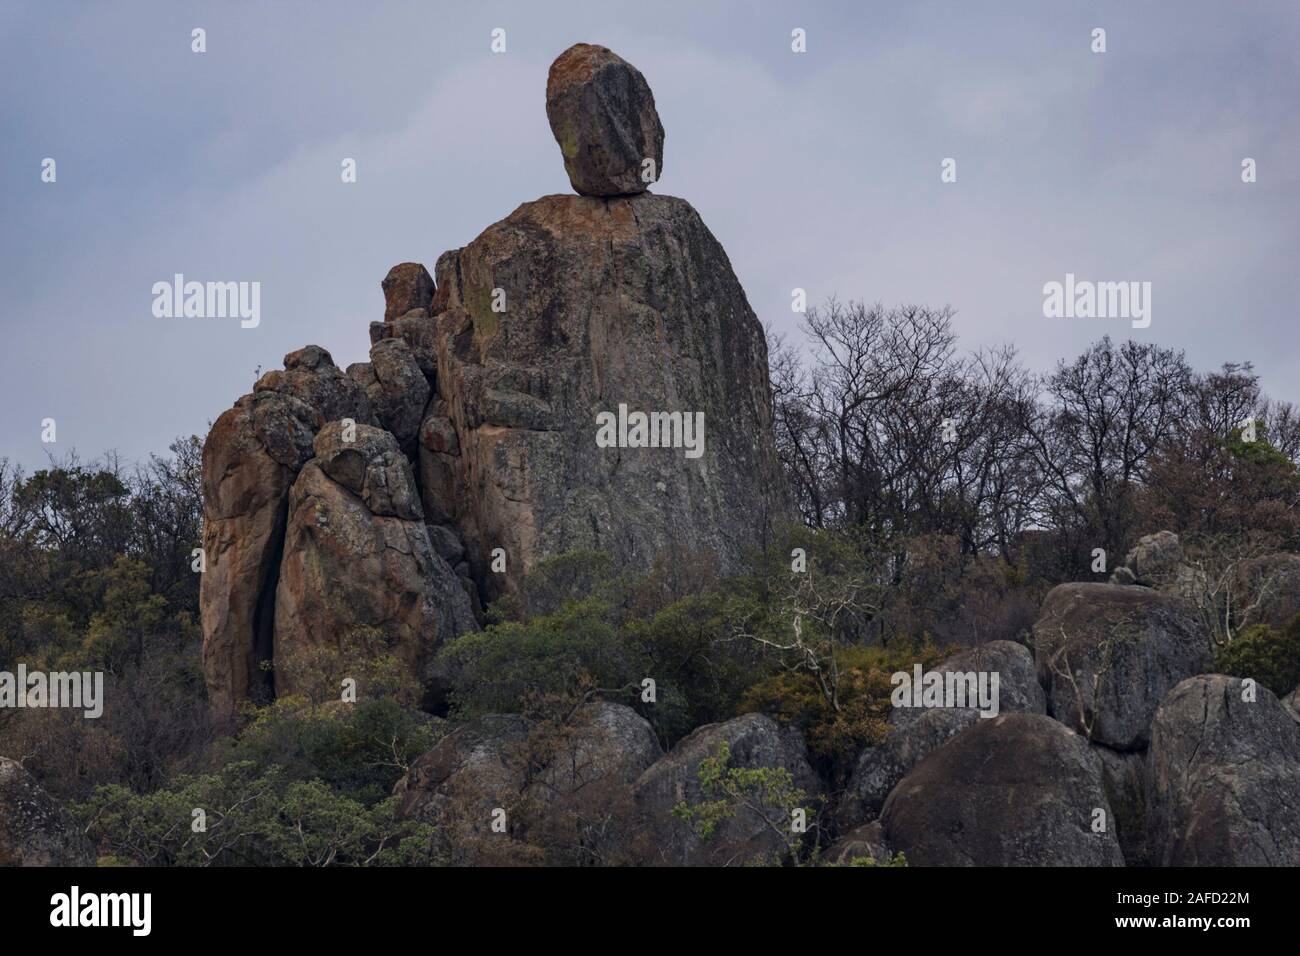 Zimbabwe. Matobo national park, a UNESCO world heritage site, known for its distinctive granite 'Kopje's (rock hills) and many trees and plants. Stock Photo